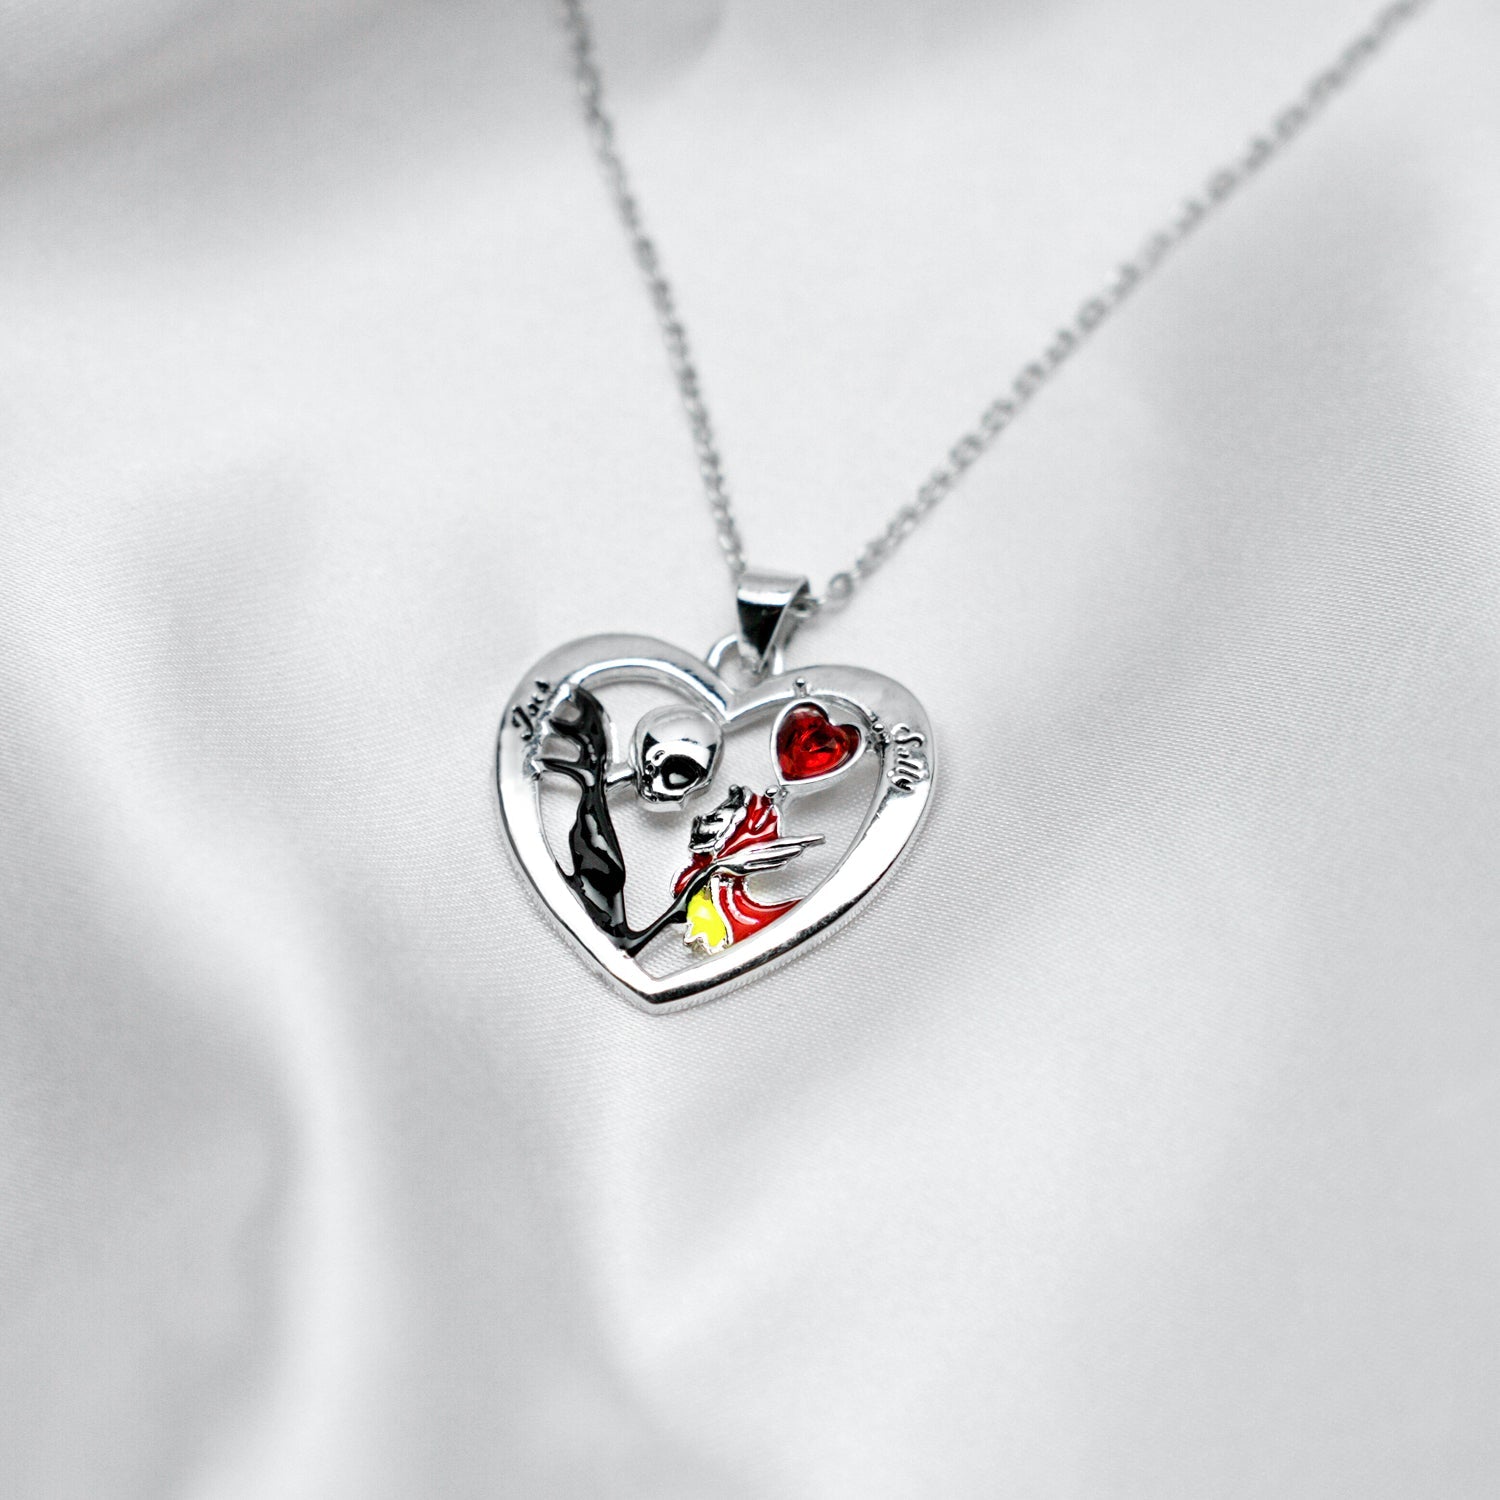 The Night Love Necklaces